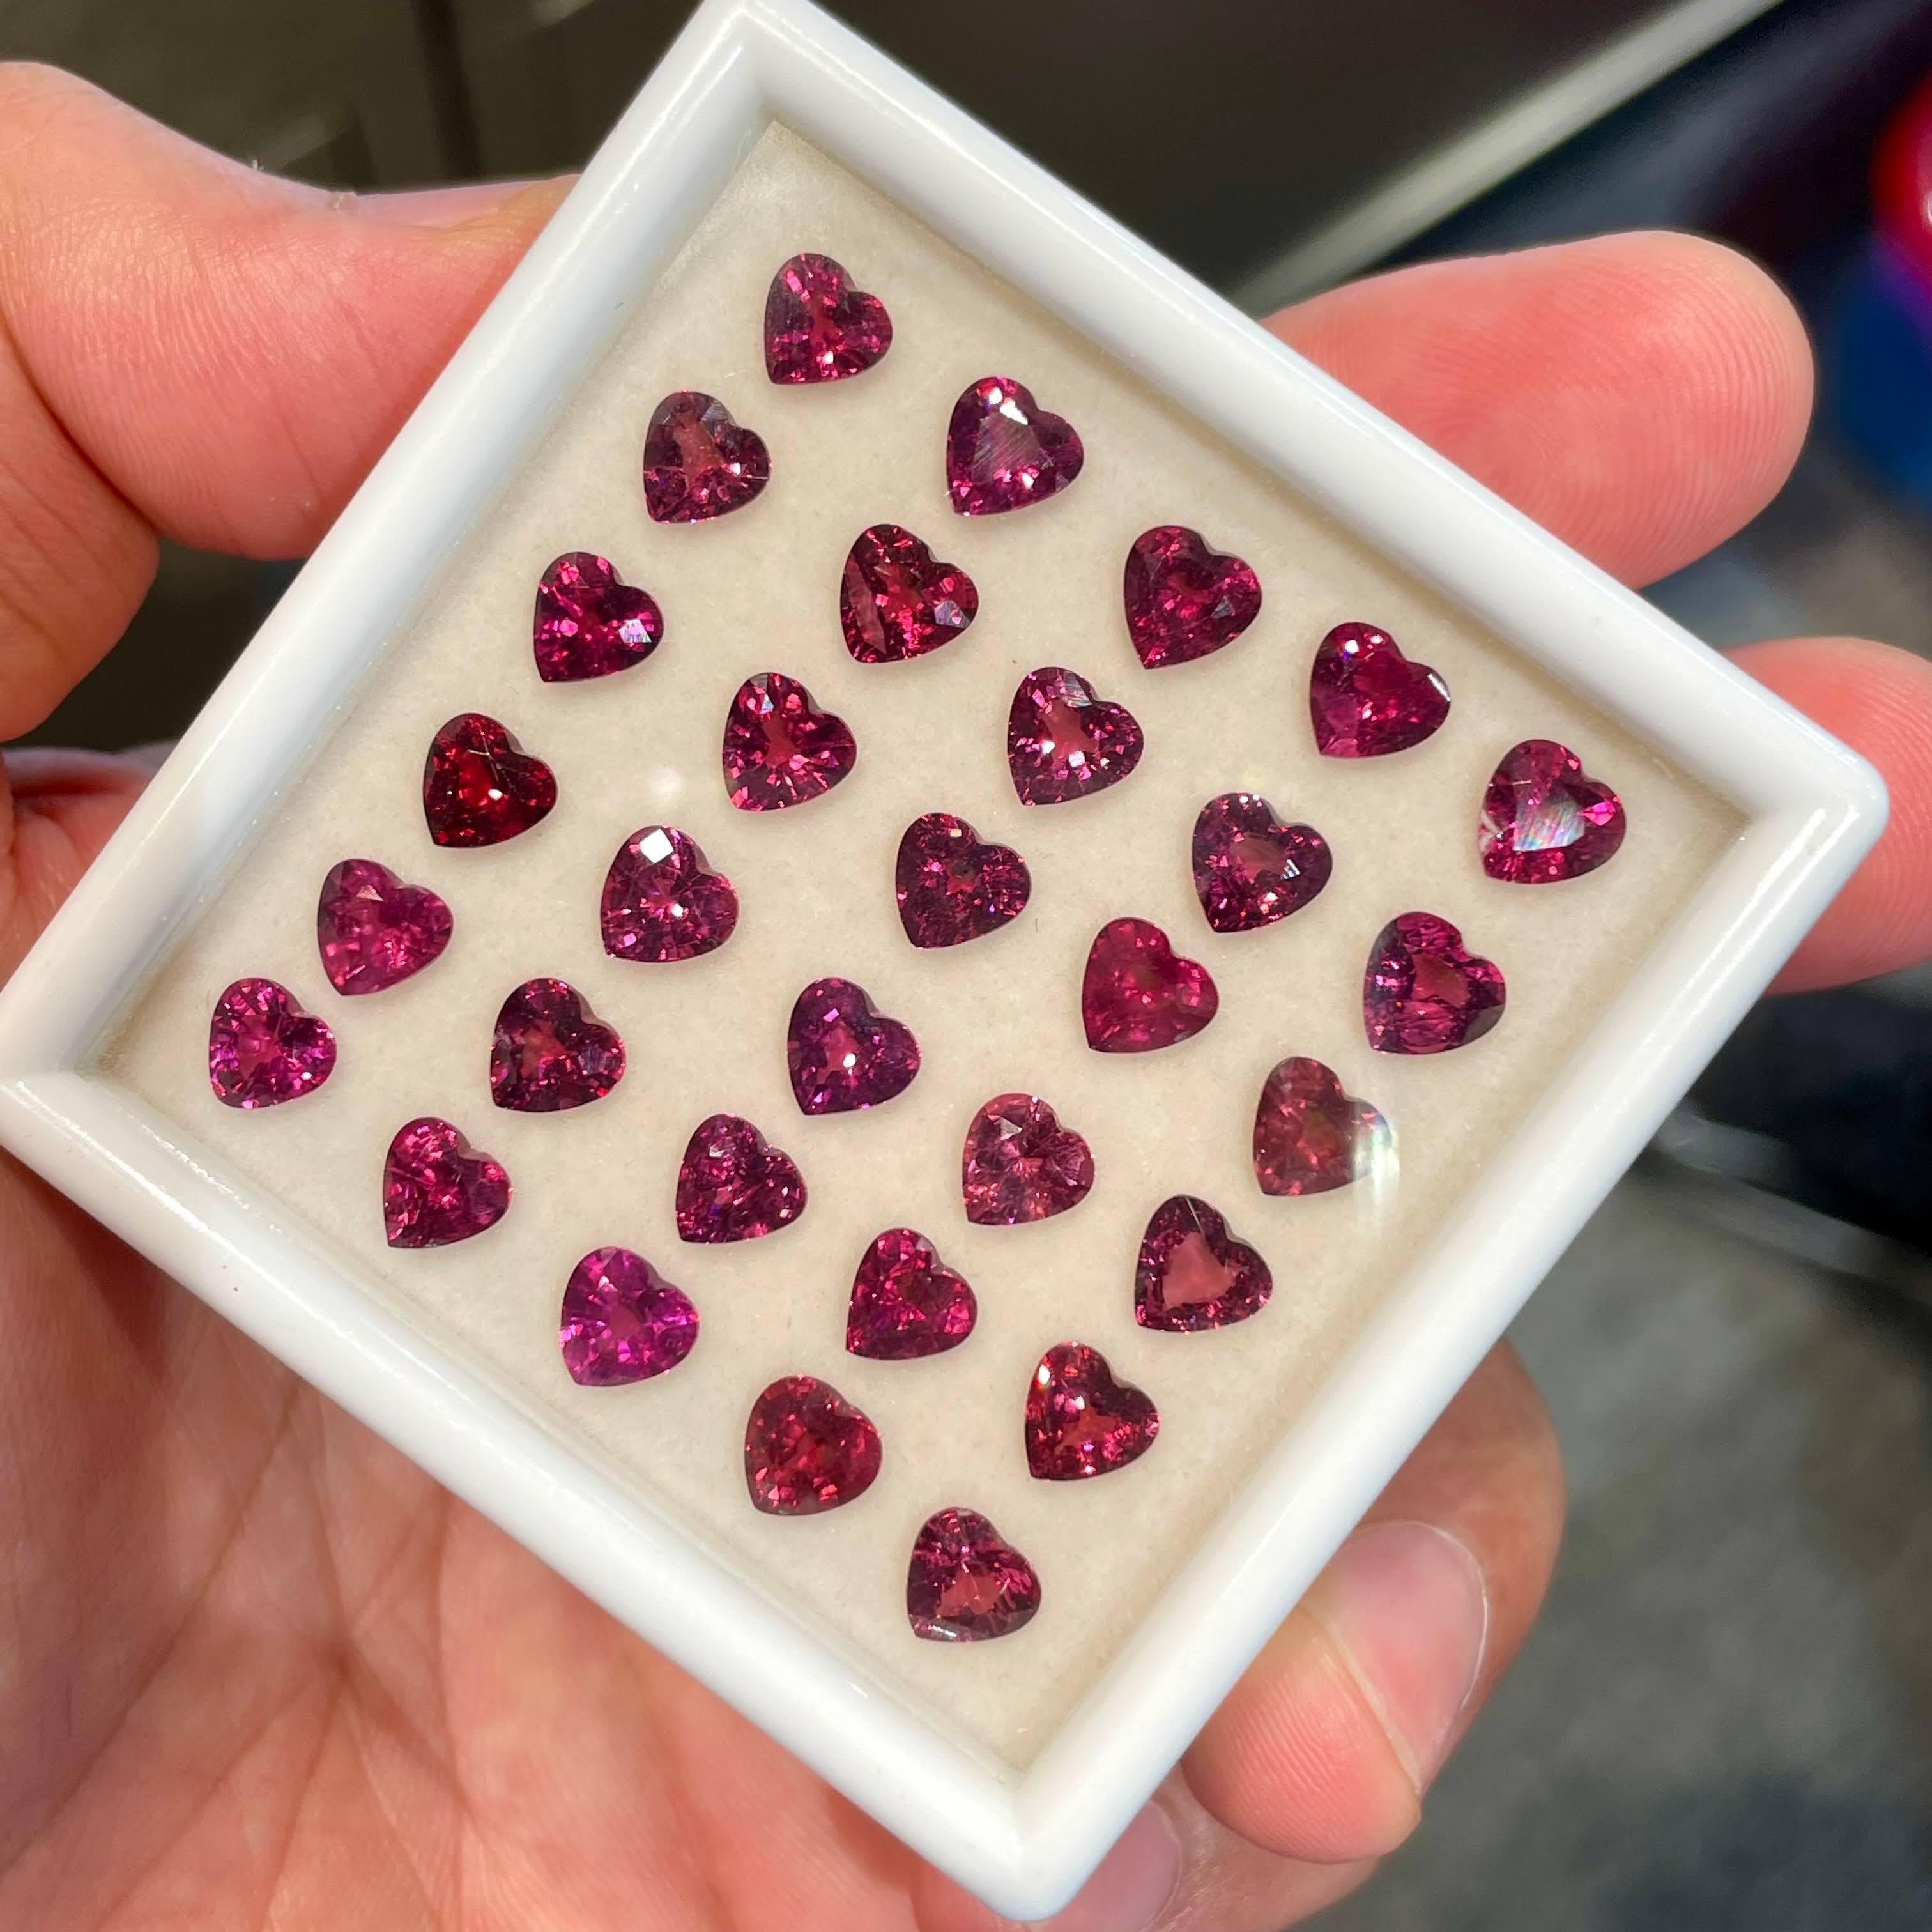 Modern 26.60 Carats Heart Shaped Loose Red Garnet Lot Madagascar's Gemstone (In Box) For Sale